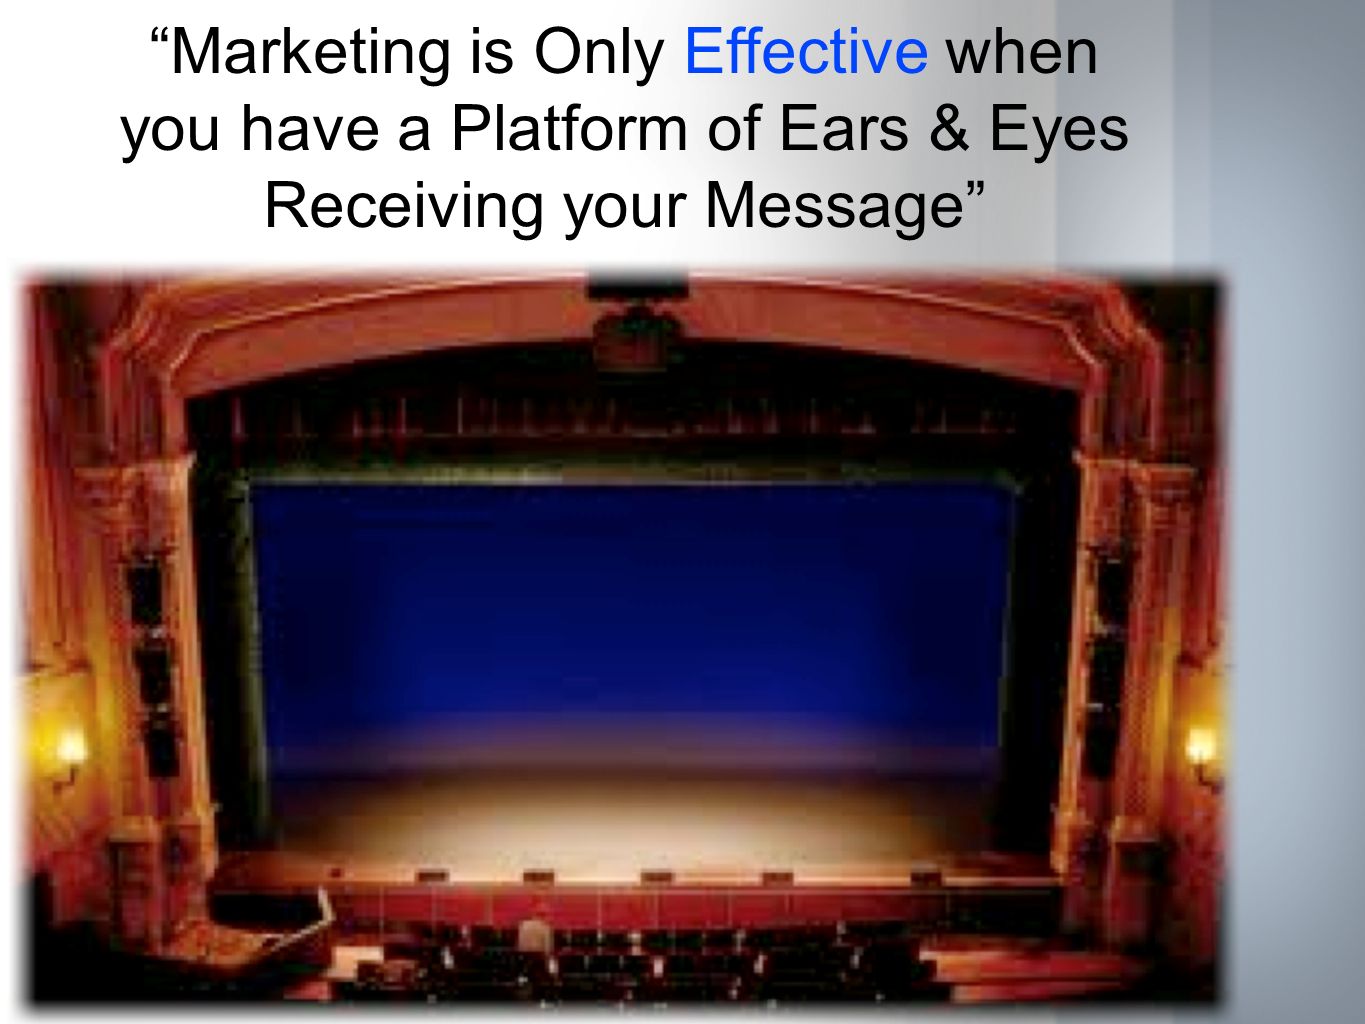 Marketing is Only Effective when you have a Platform of Ears & Eyes Receiving your Message